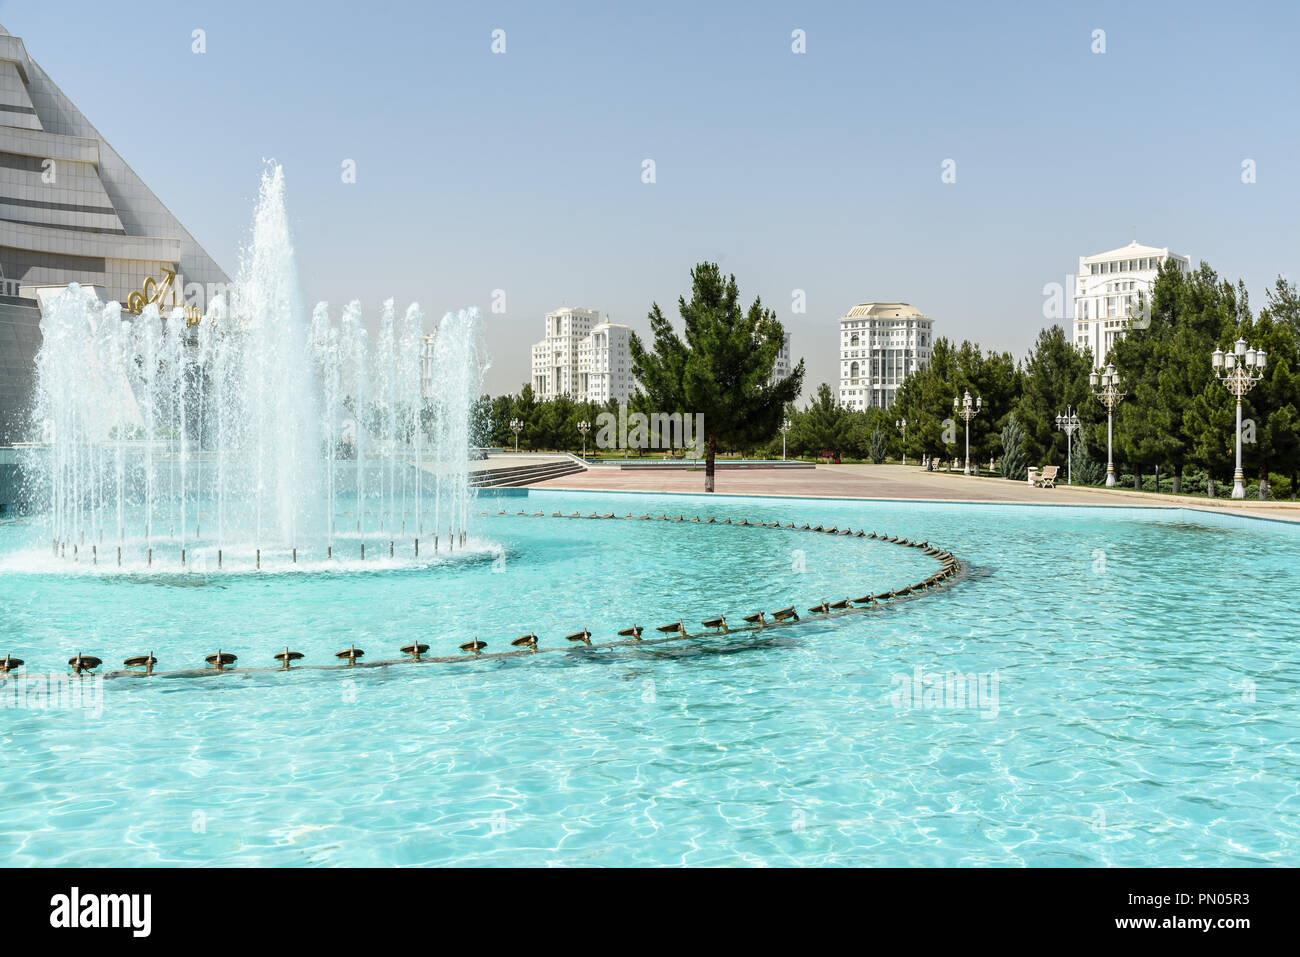 typical white marble-clad building surrounded by fountains in the Independance Park in Ashgabat, Turkmenistan Stock Photo